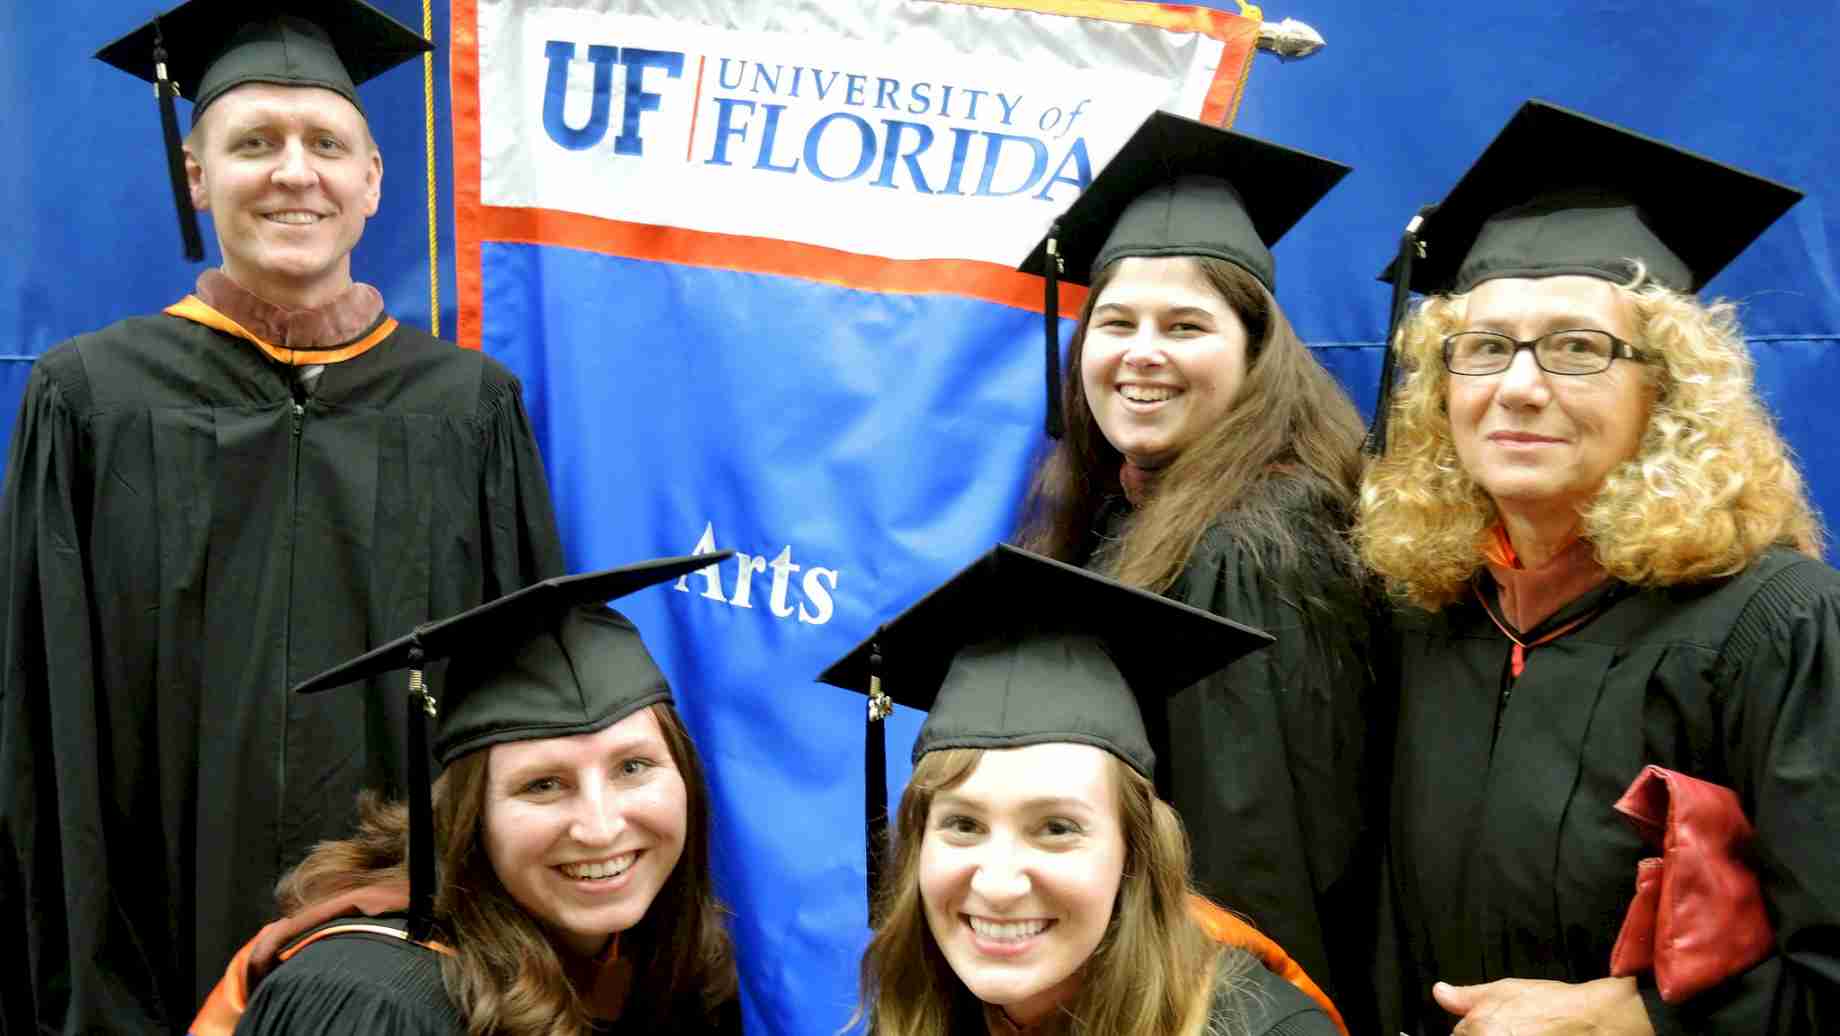 Some of our graduates from the Online MA program in art education participating in commencement activities on campus.